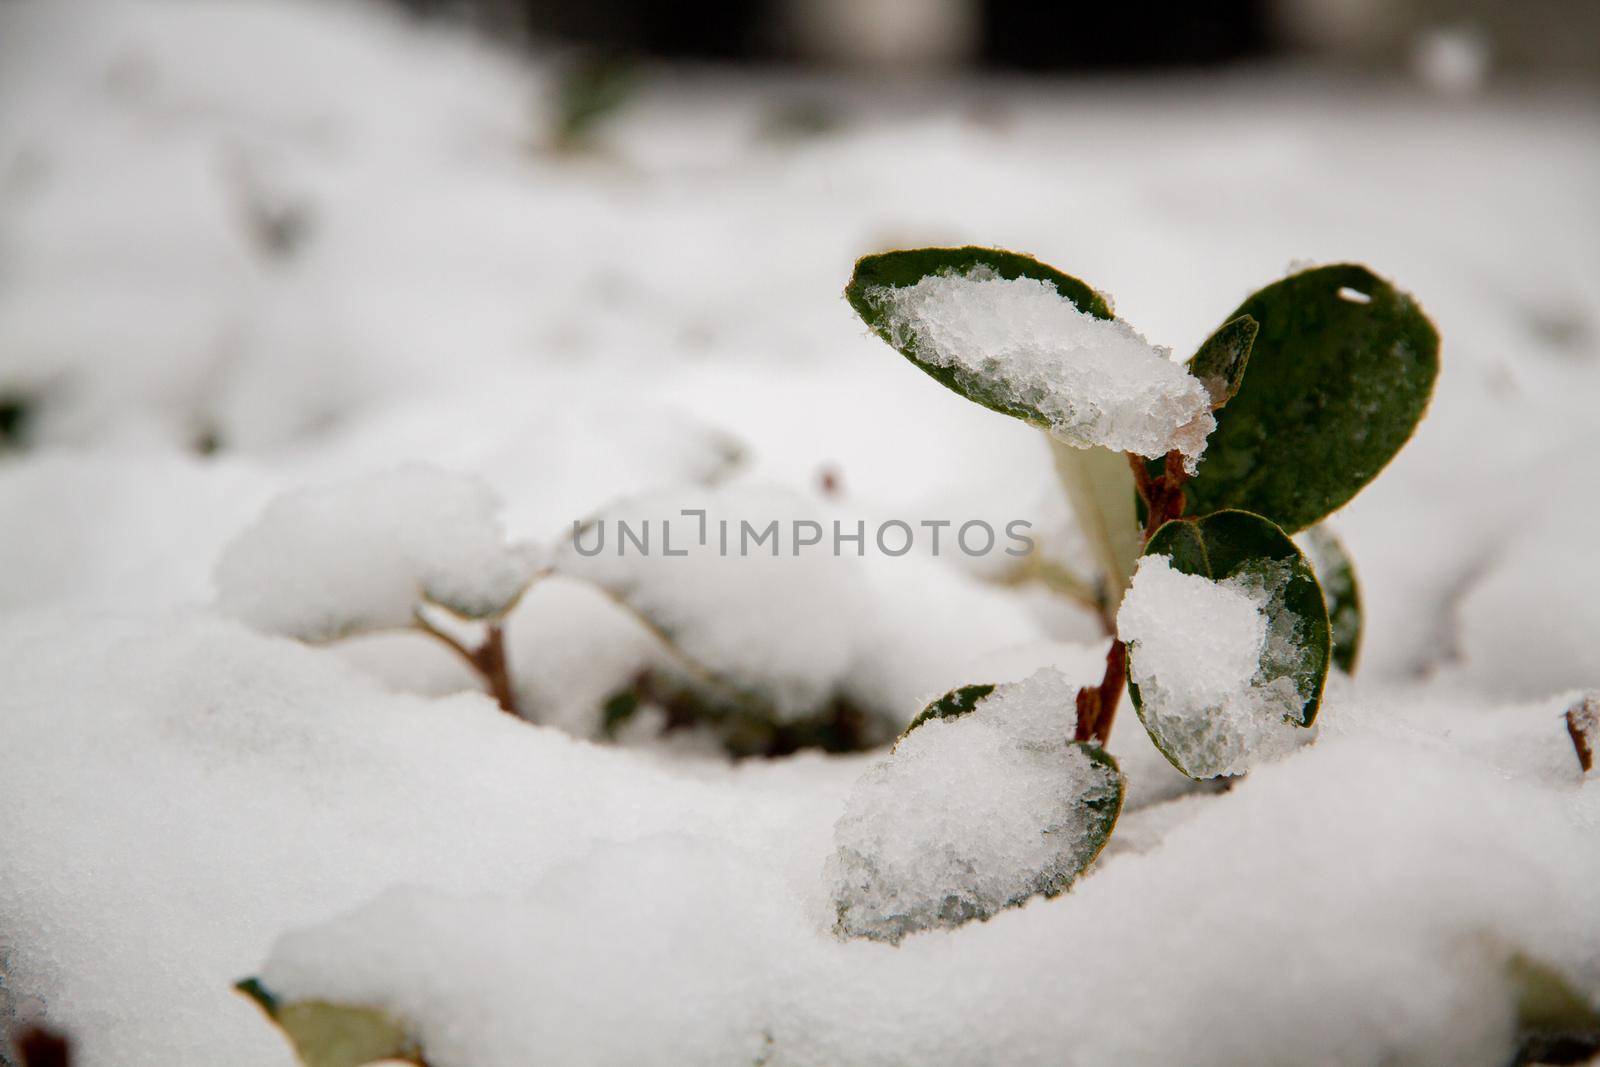 Close-up of some green leaves covered in snow